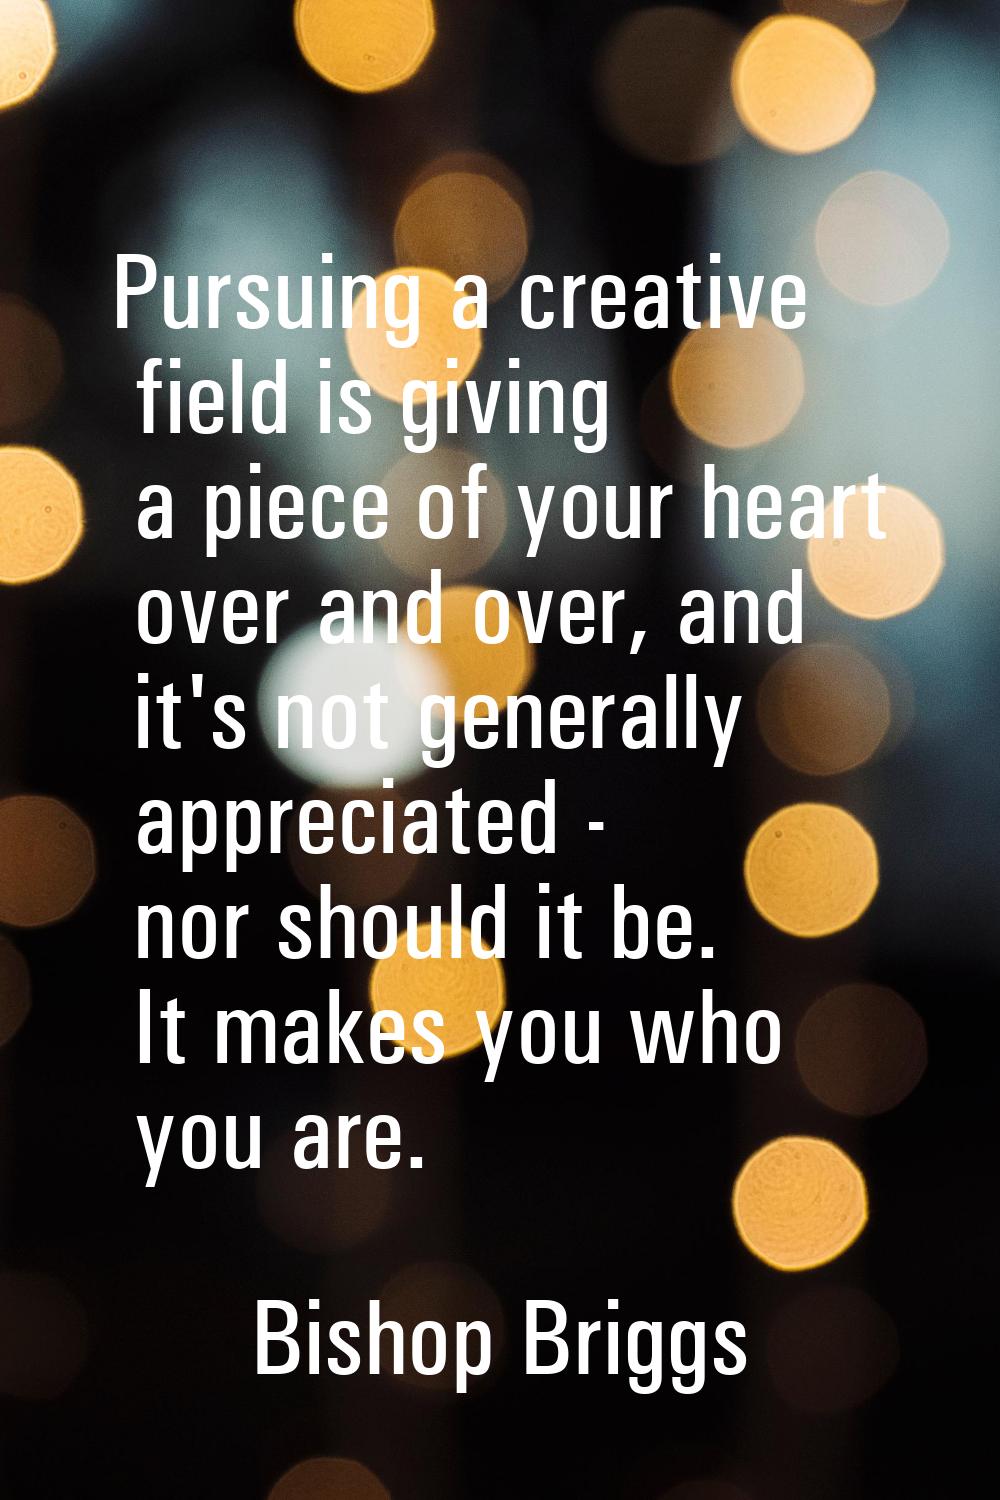 Pursuing a creative field is giving a piece of your heart over and over, and it's not generally app